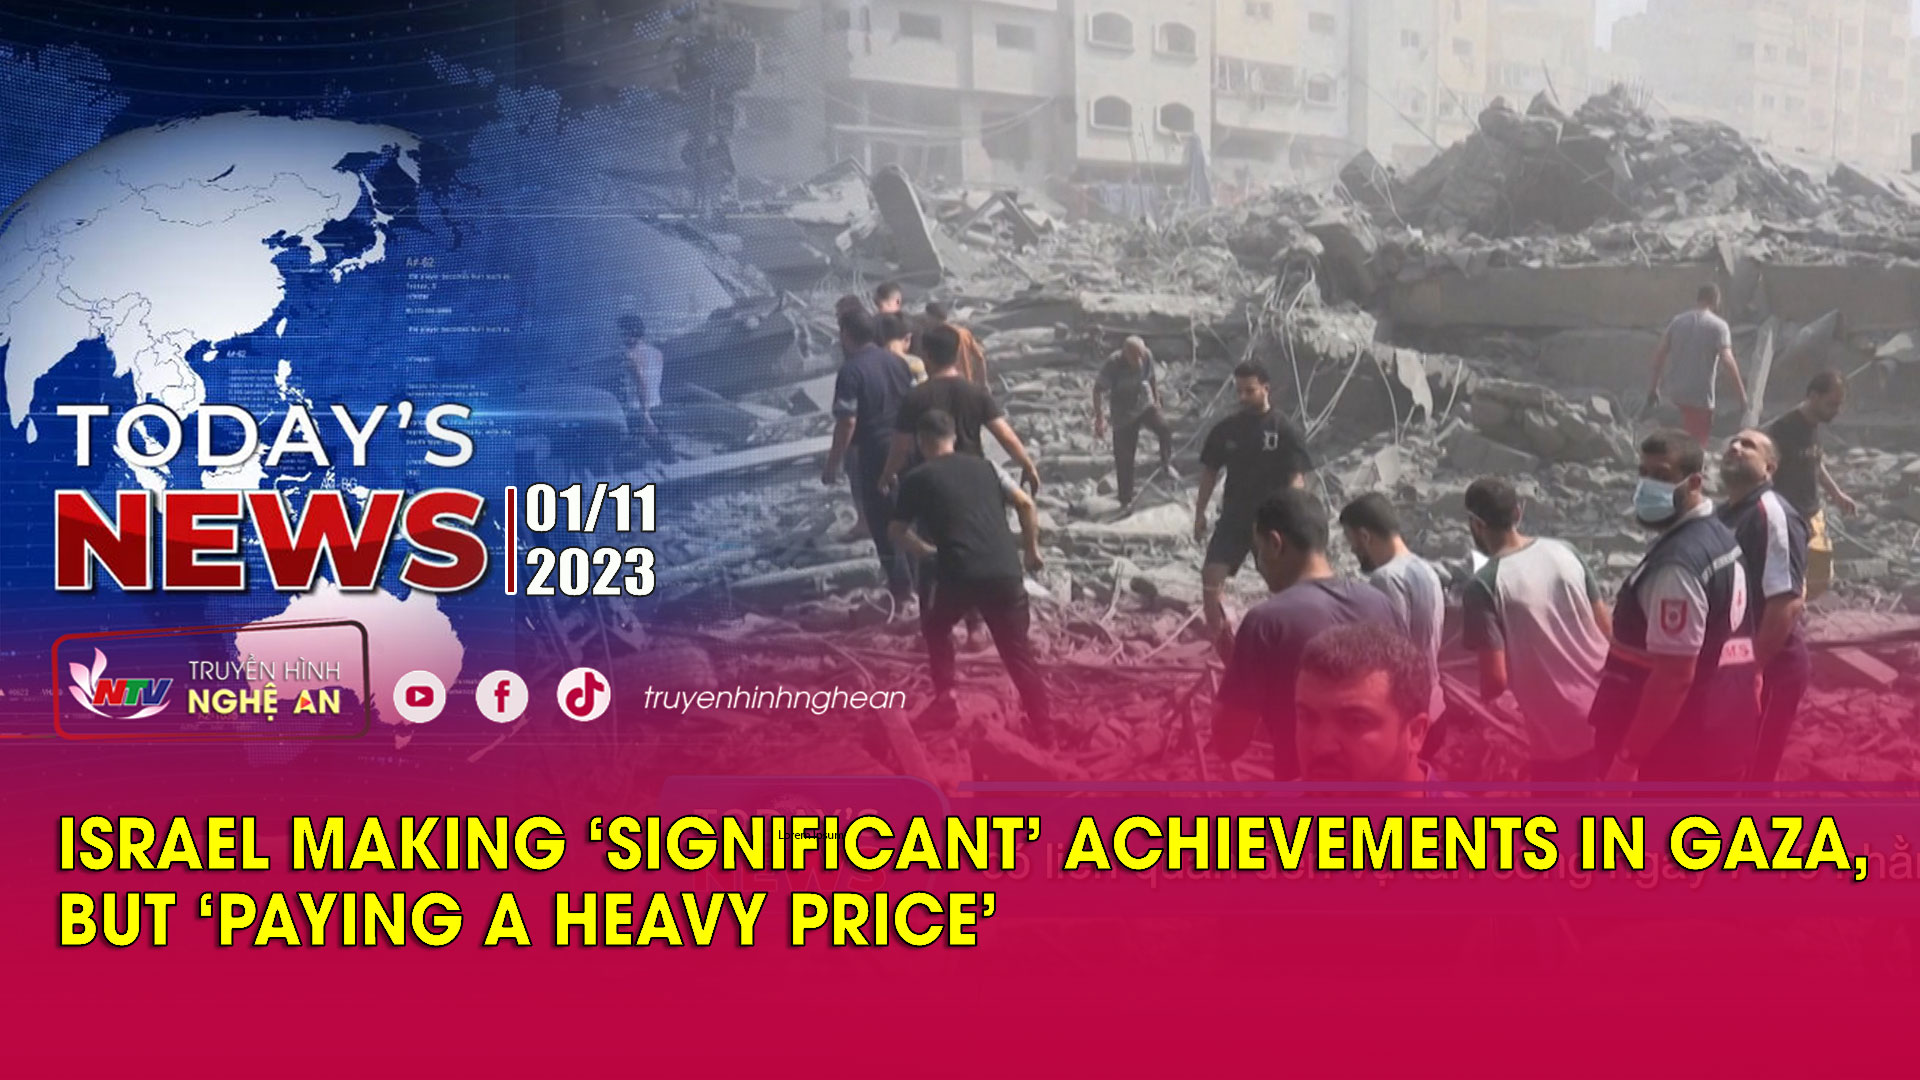 Today's News - 1/11/2023: Israel making ‘significant’ achievements in Gaza, but paying a heavy price